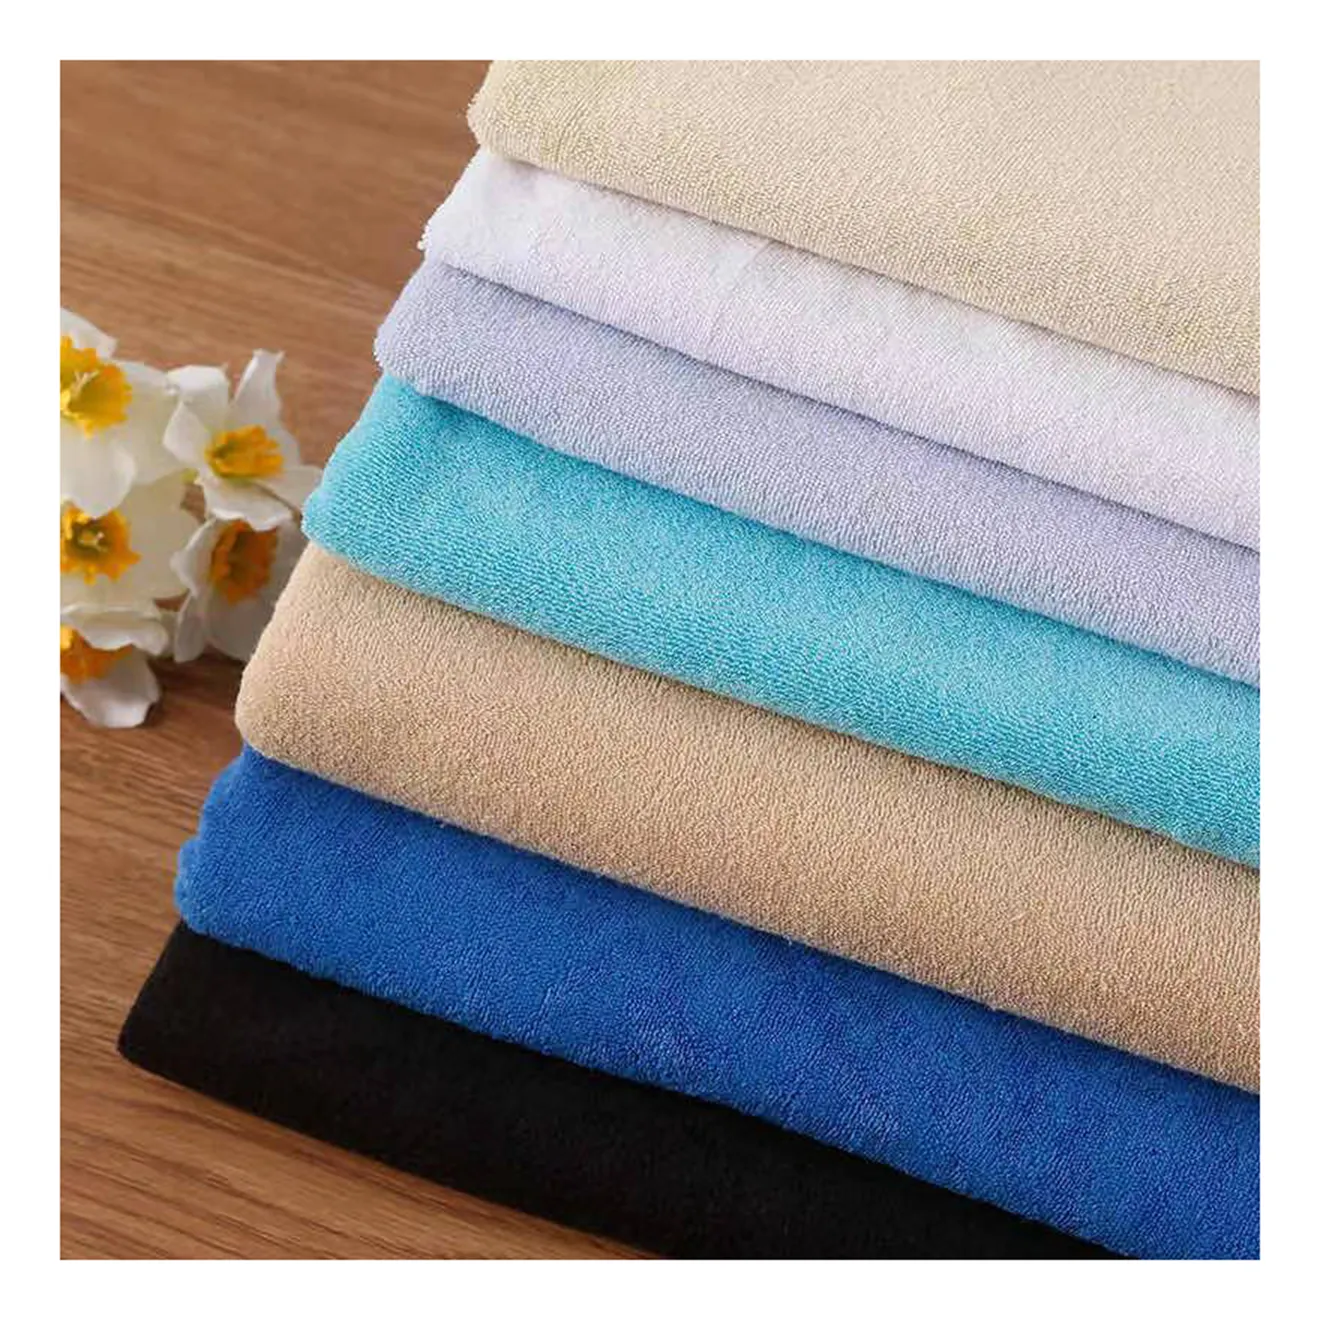 Hotel hoem textile terry cloth 100% cotton towel cleaning fabric toweling robe baby clothes newborn fabrics